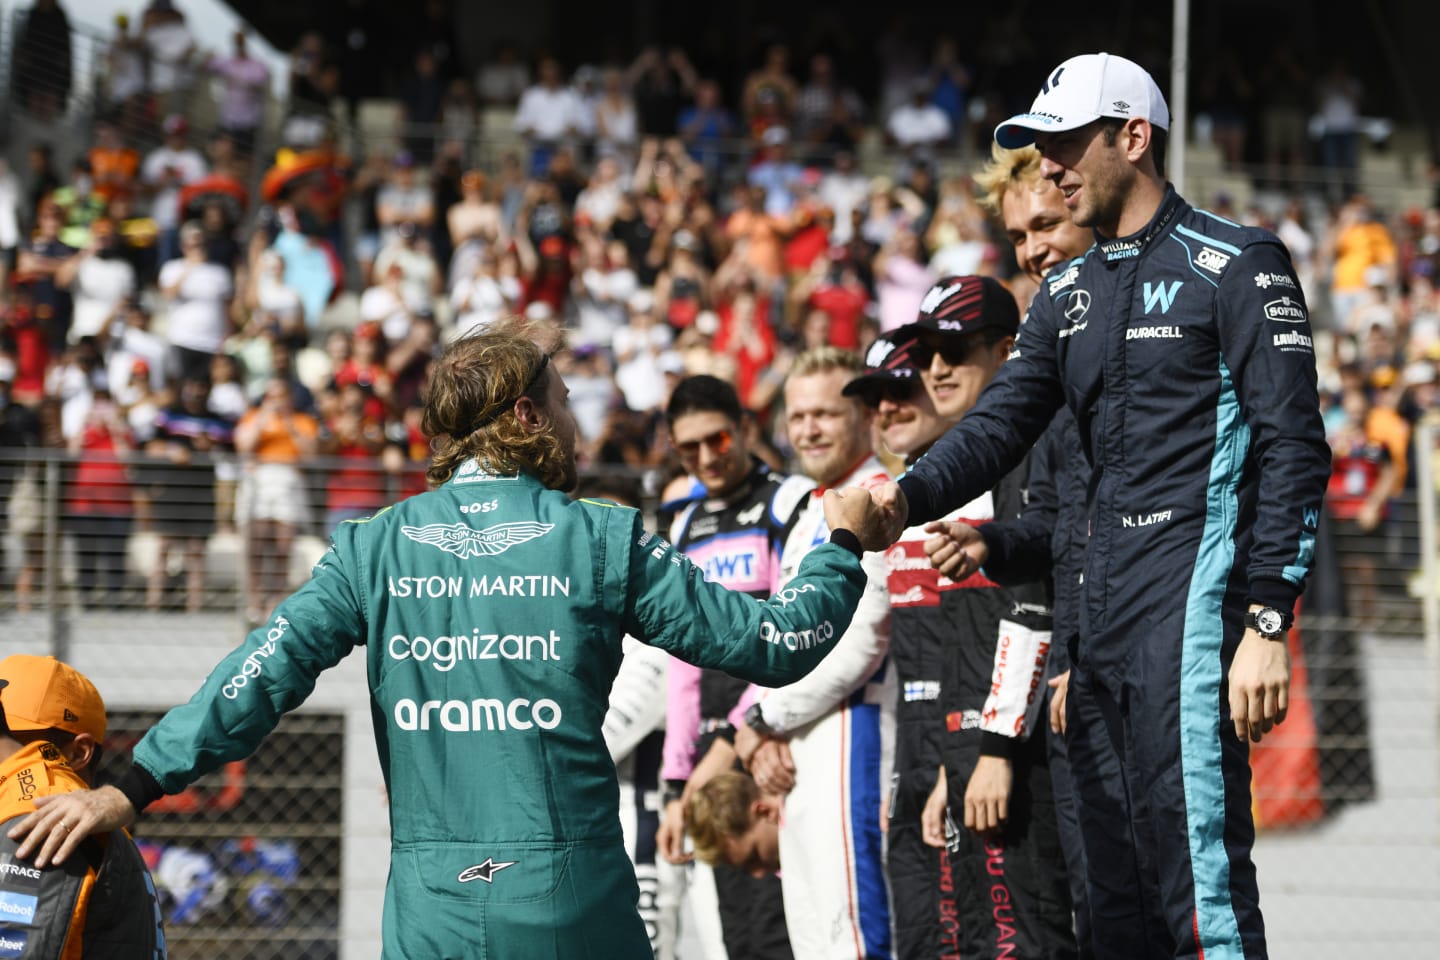 ABU DHABI, UNITED ARAB EMIRATES - NOVEMBER 20: Sebastian Vettel of Germany and Aston Martin F1 Team is greeted by Nicholas Latifi of Canada and Williams  as they prepare for the F1 2022 End of Year photo prior to the F1 Grand Prix of Abu Dhabi at Yas Marina Circuit on November 20, 2022 in Abu Dhabi, United Arab Emirates. (Photo by Rudy Carezzevoli/Getty Images)